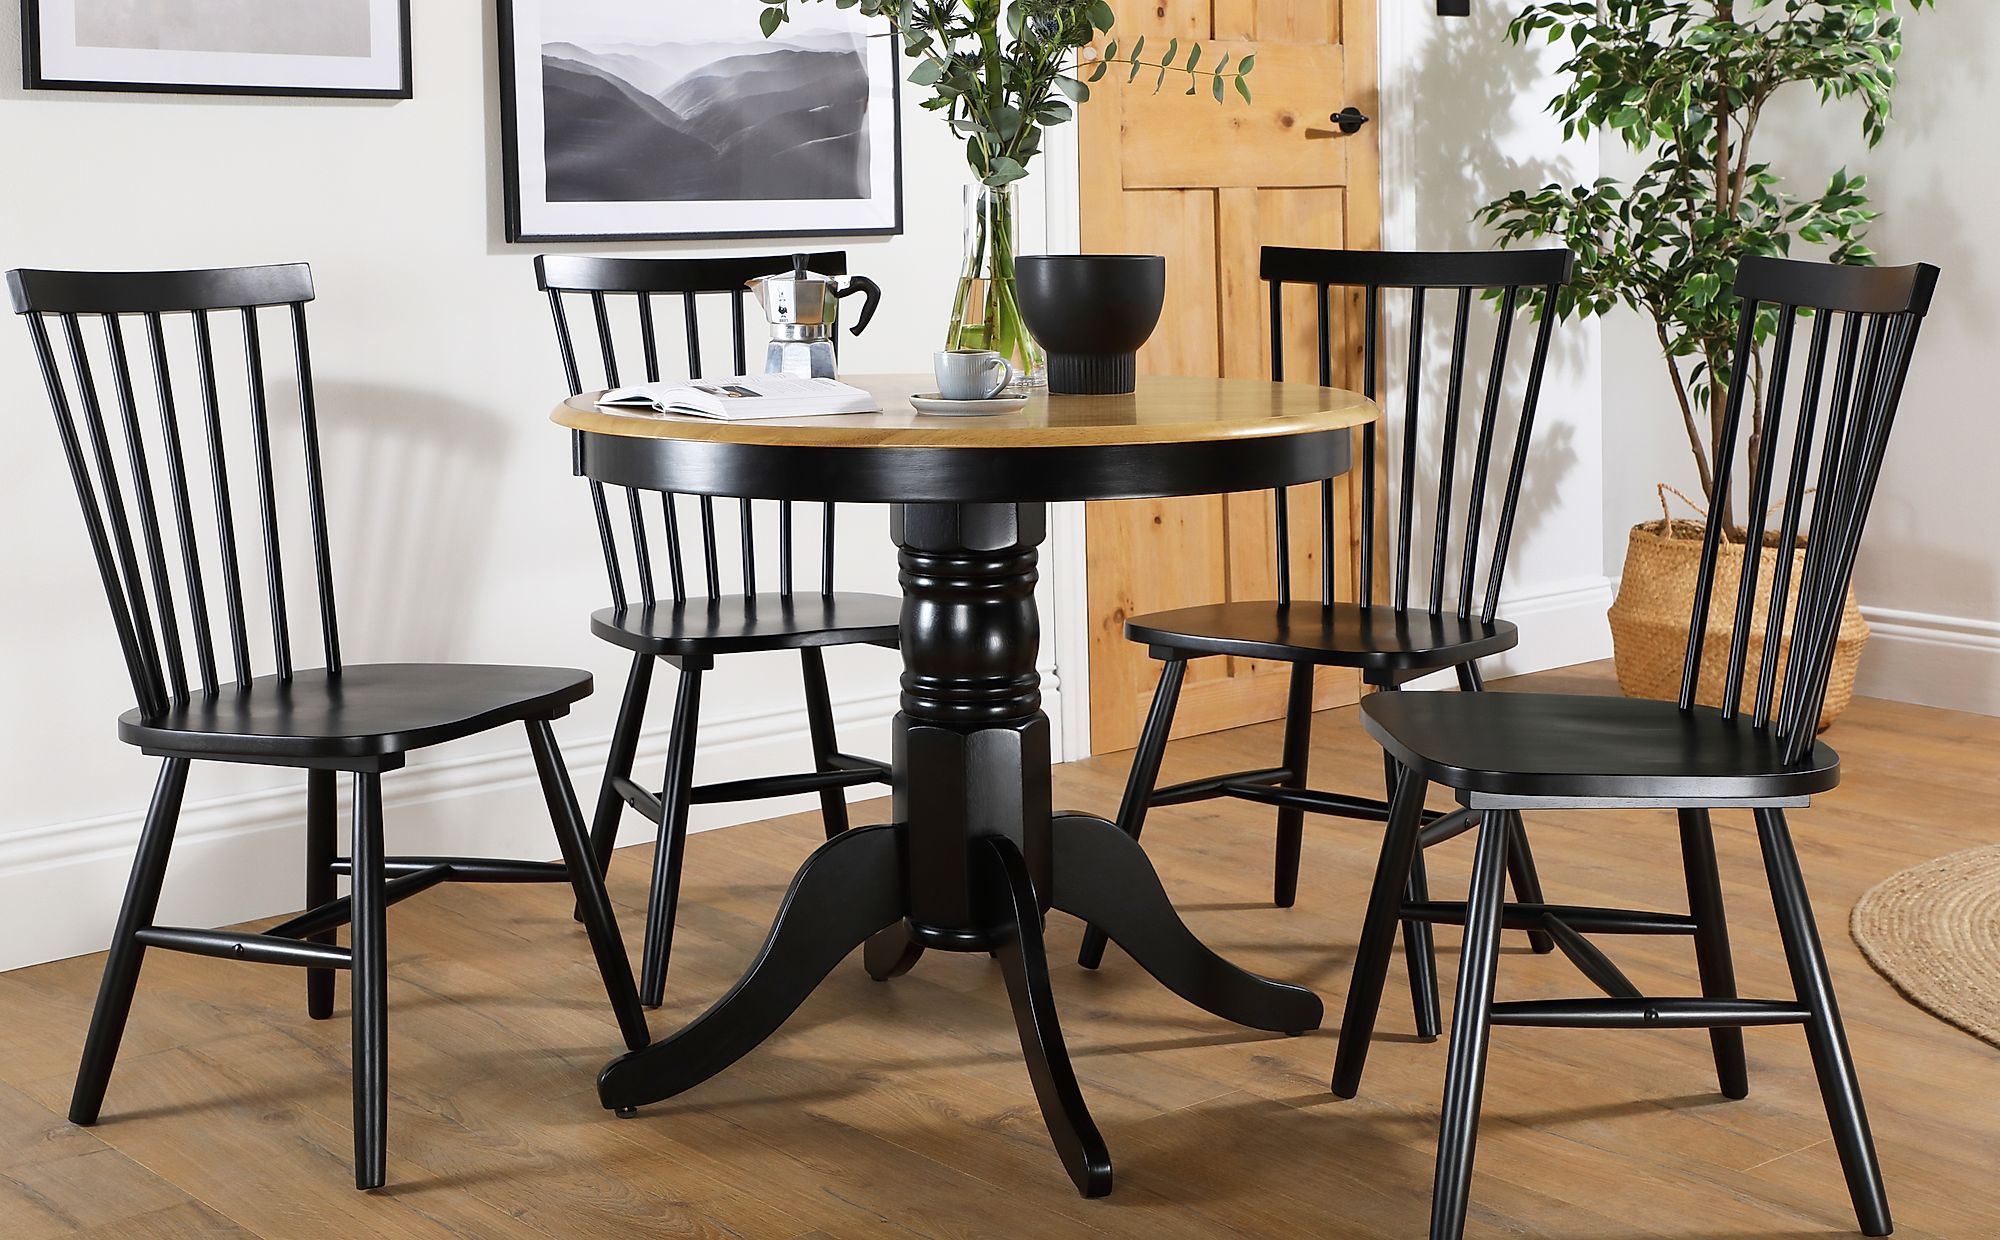 Dining Room Table And Chairs Black Friday